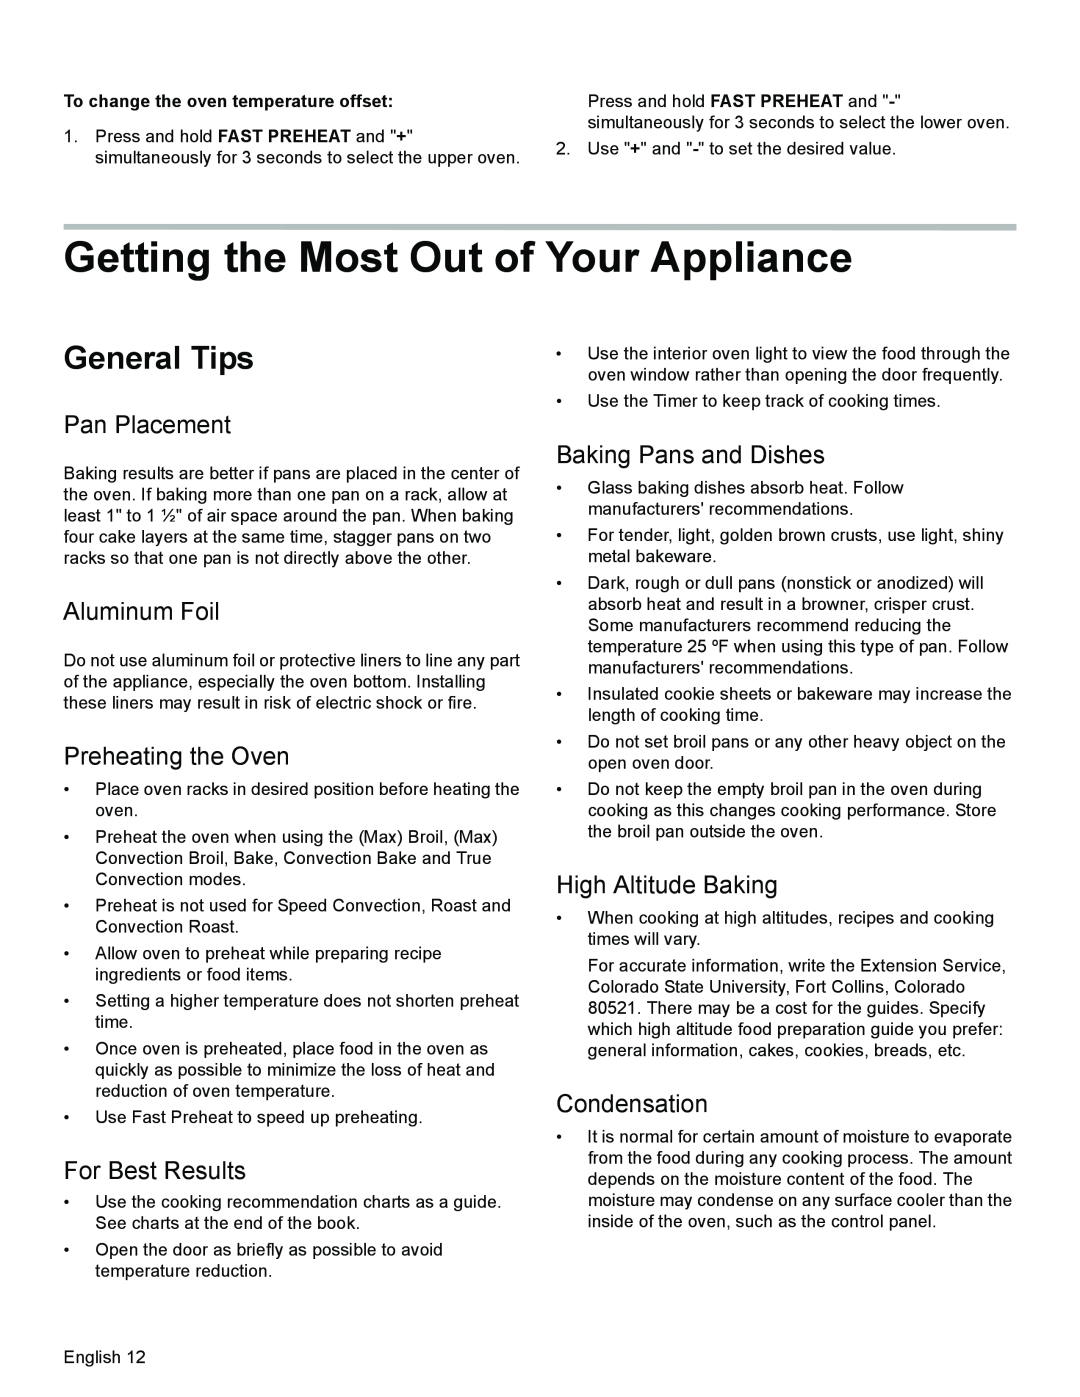 Thermador PODMW301 Getting the Most Out of Your Appliance, General Tips, Pan Placement, Aluminum Foil, Preheating the Oven 